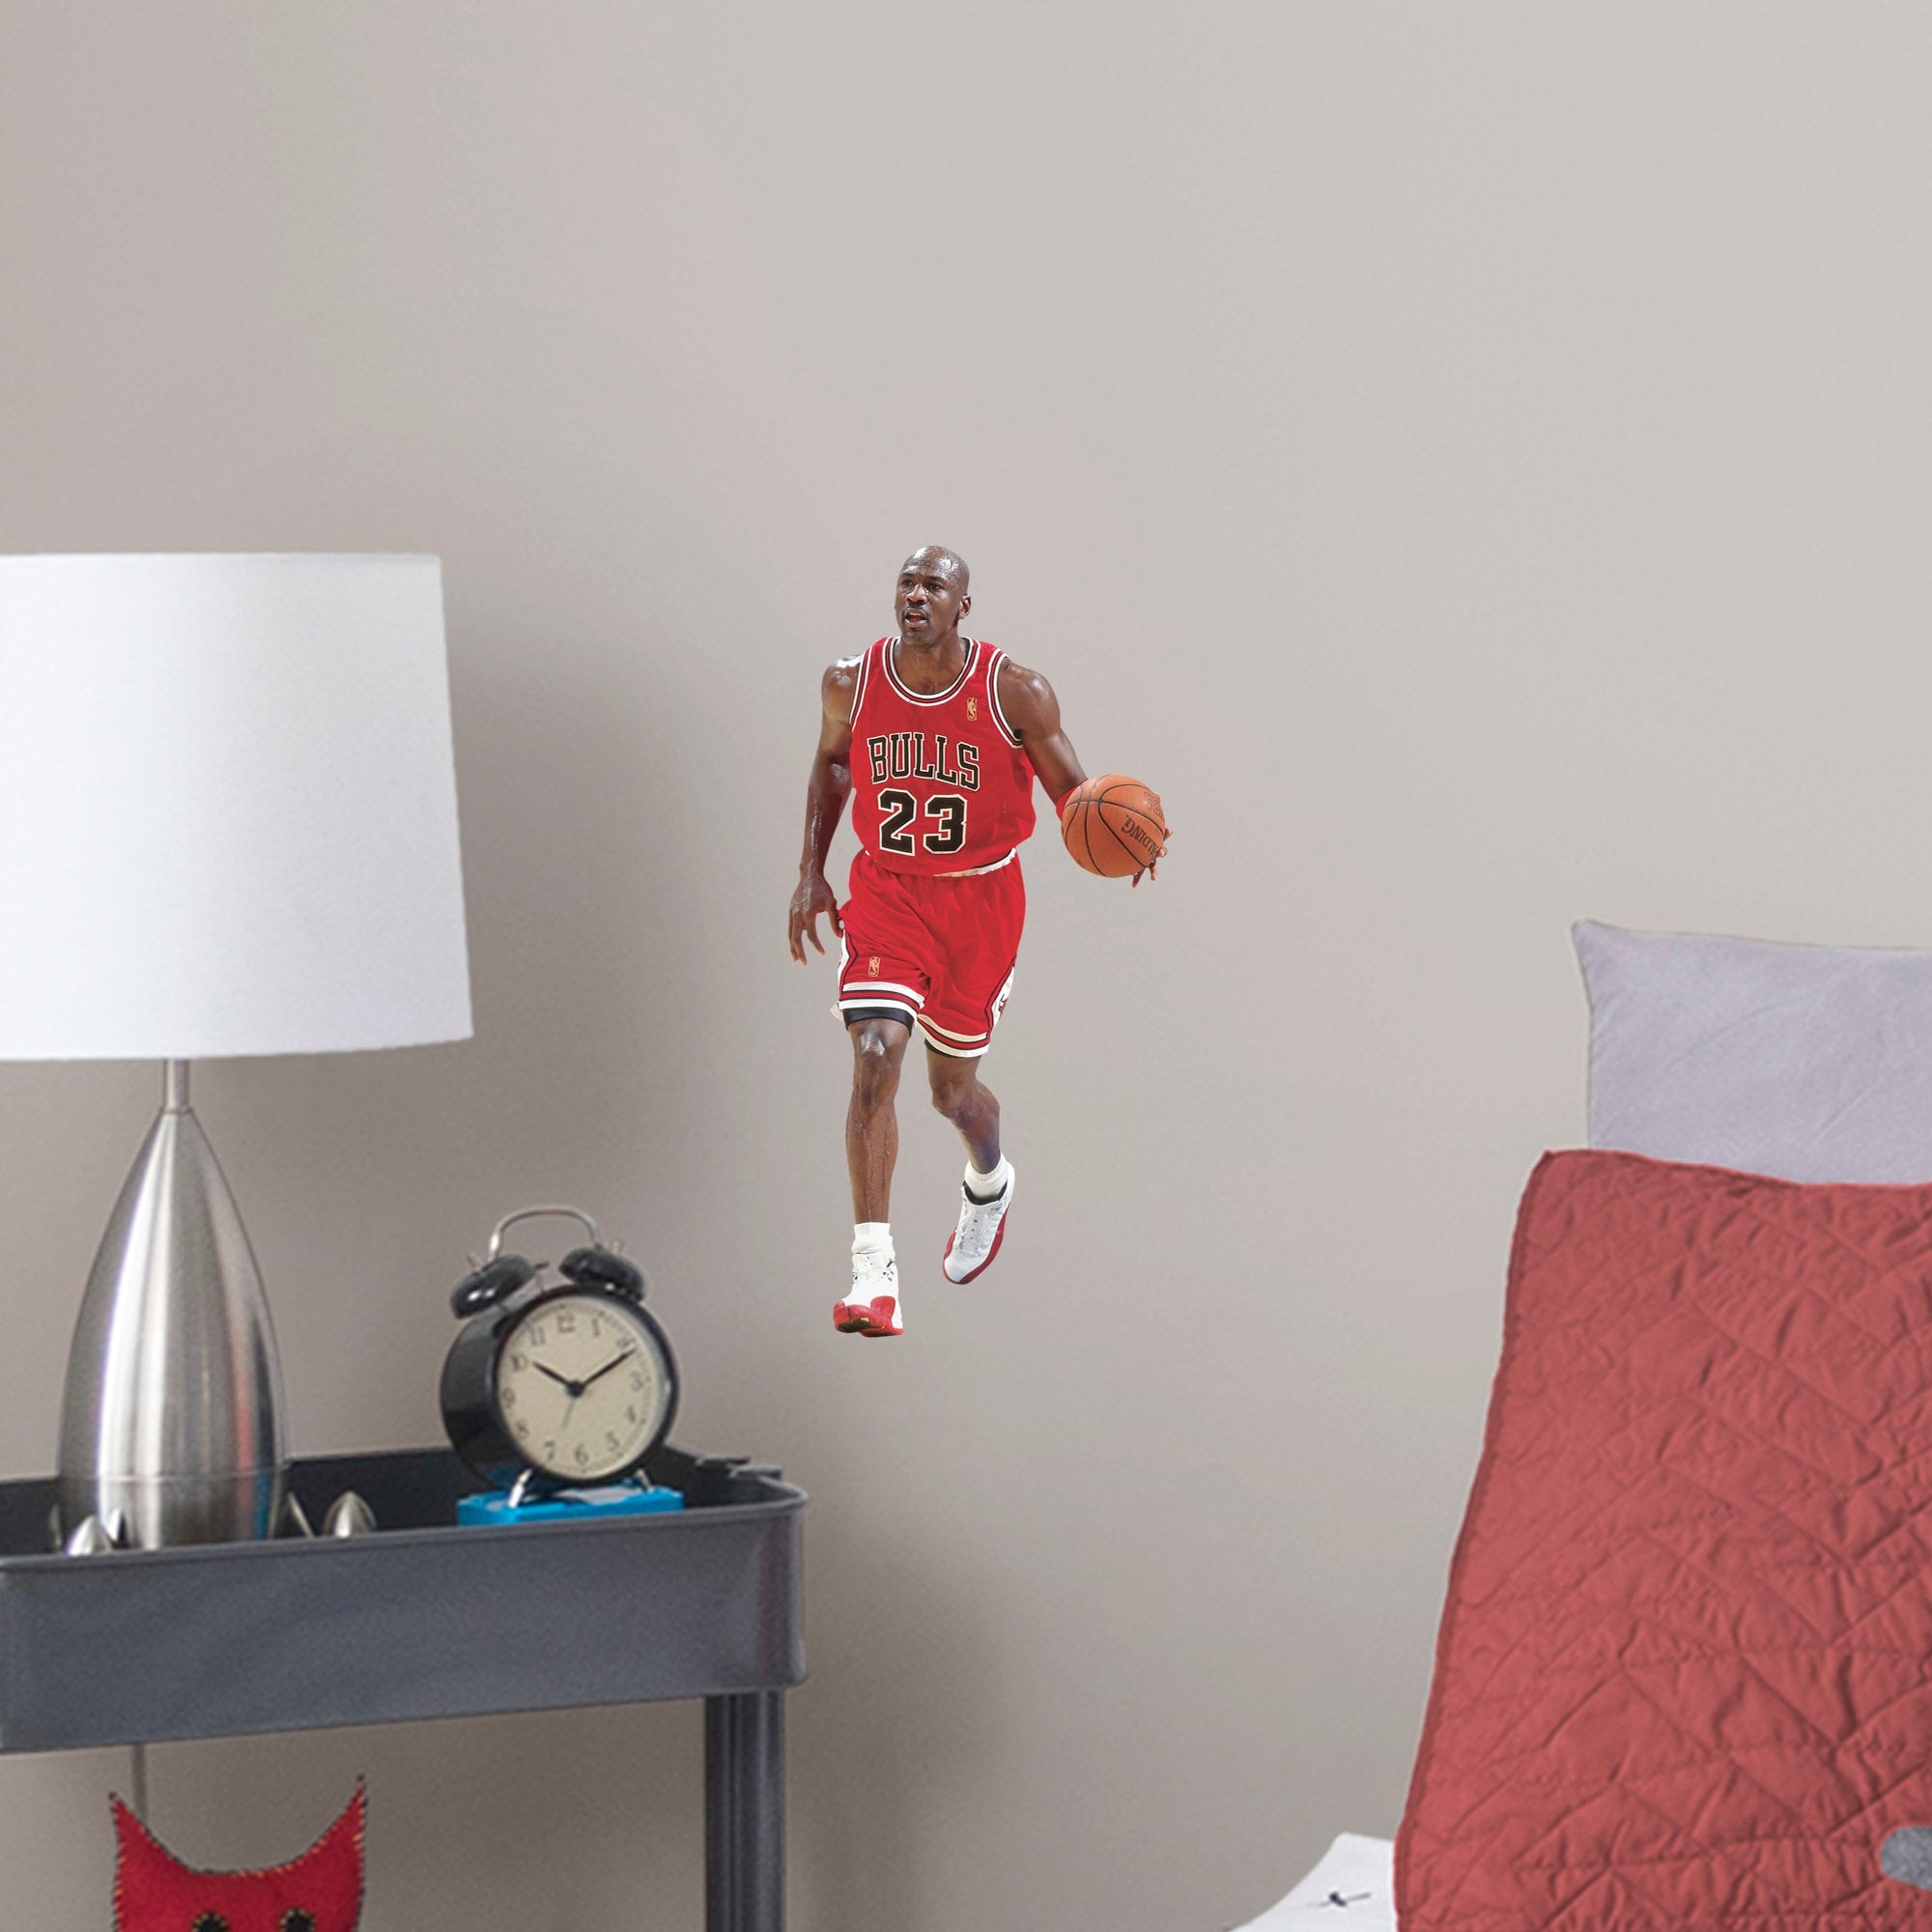 Michael Jordan for Chicago Bulls - Officially Licensed NBA Removable Wall Decal Large by Fathead | Vinyl